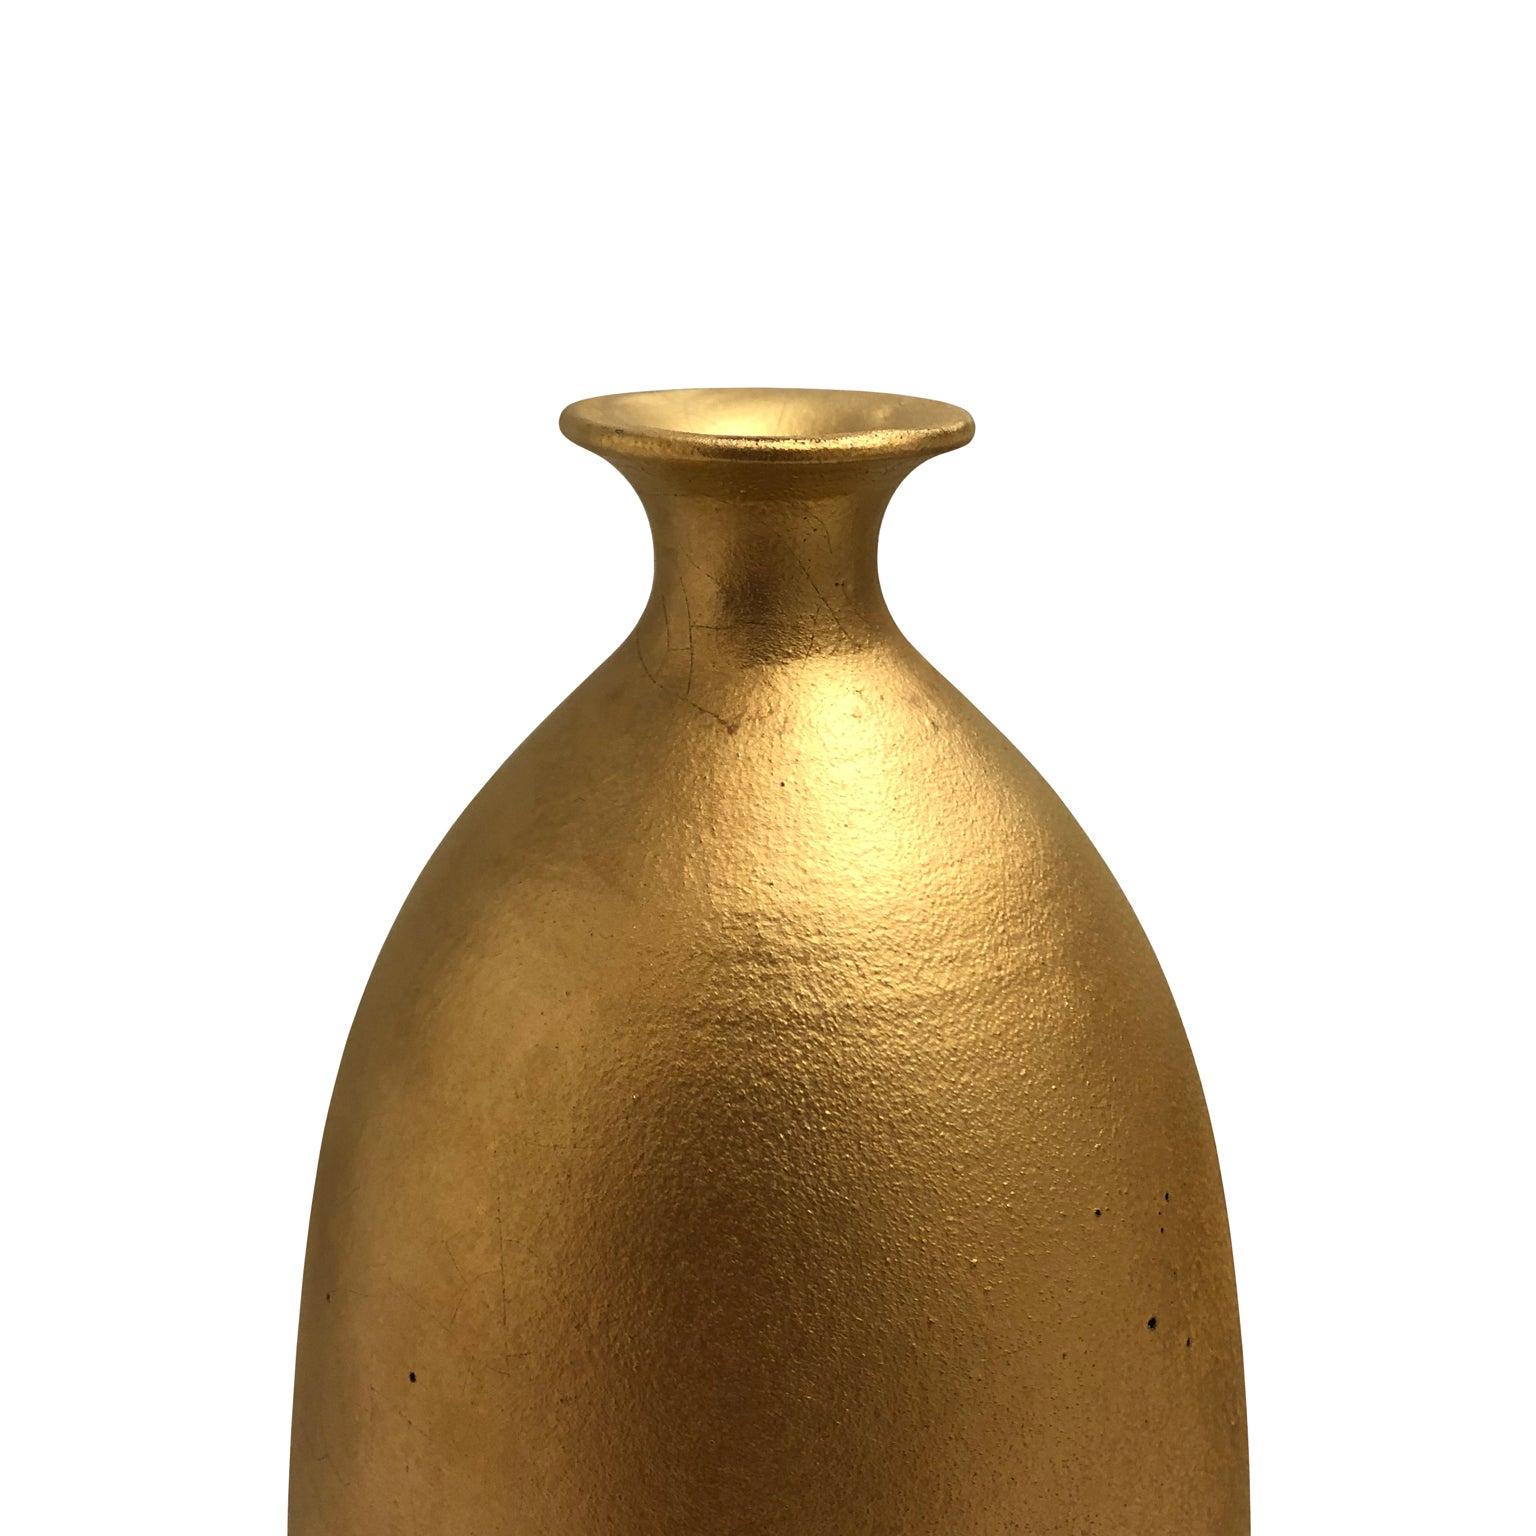 Tall ceramic bottle vase with burnished gold lustre glaze by Sandi Fellman, 2019. Veteran photographer Sandi Fellman's ceramic vessels are an exploration of a new medium. The forms, palettes, and sensuality of her photos can be found within each